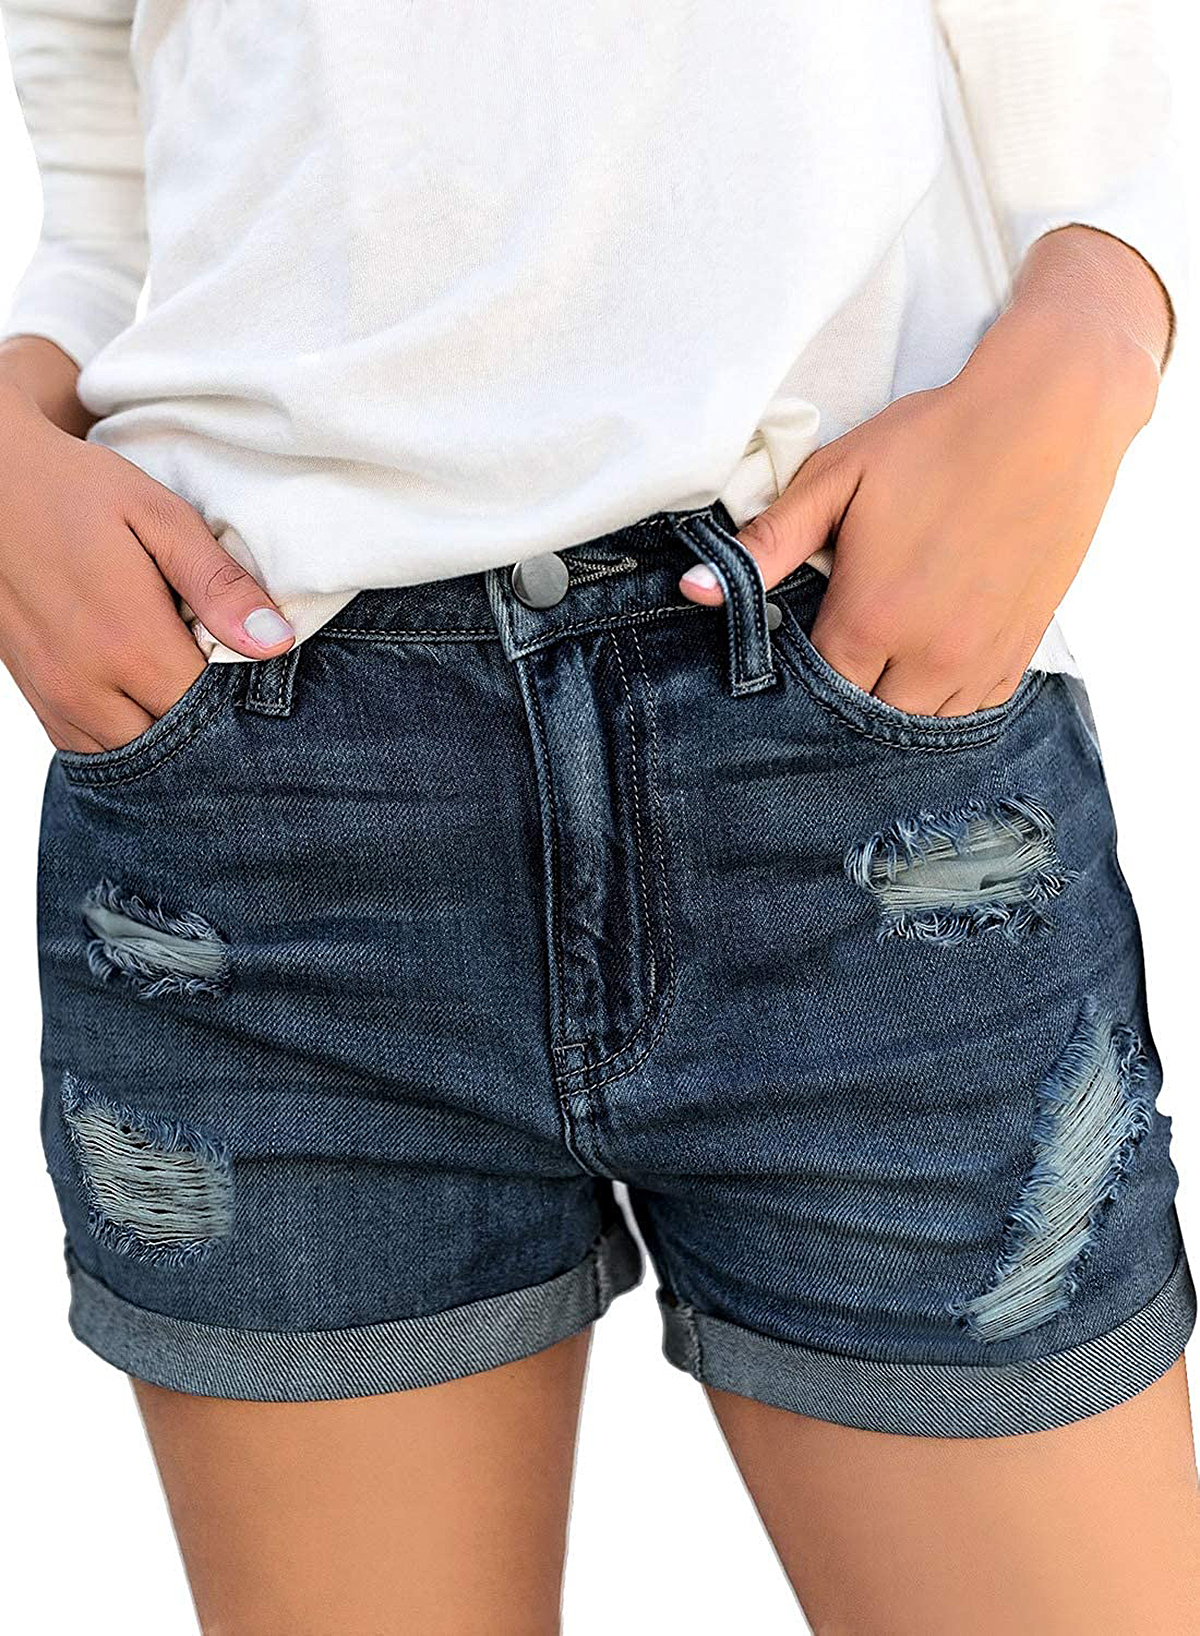 Luvamia Ripped Denim Jean Shorts Are Changing the Game | Us Weekly